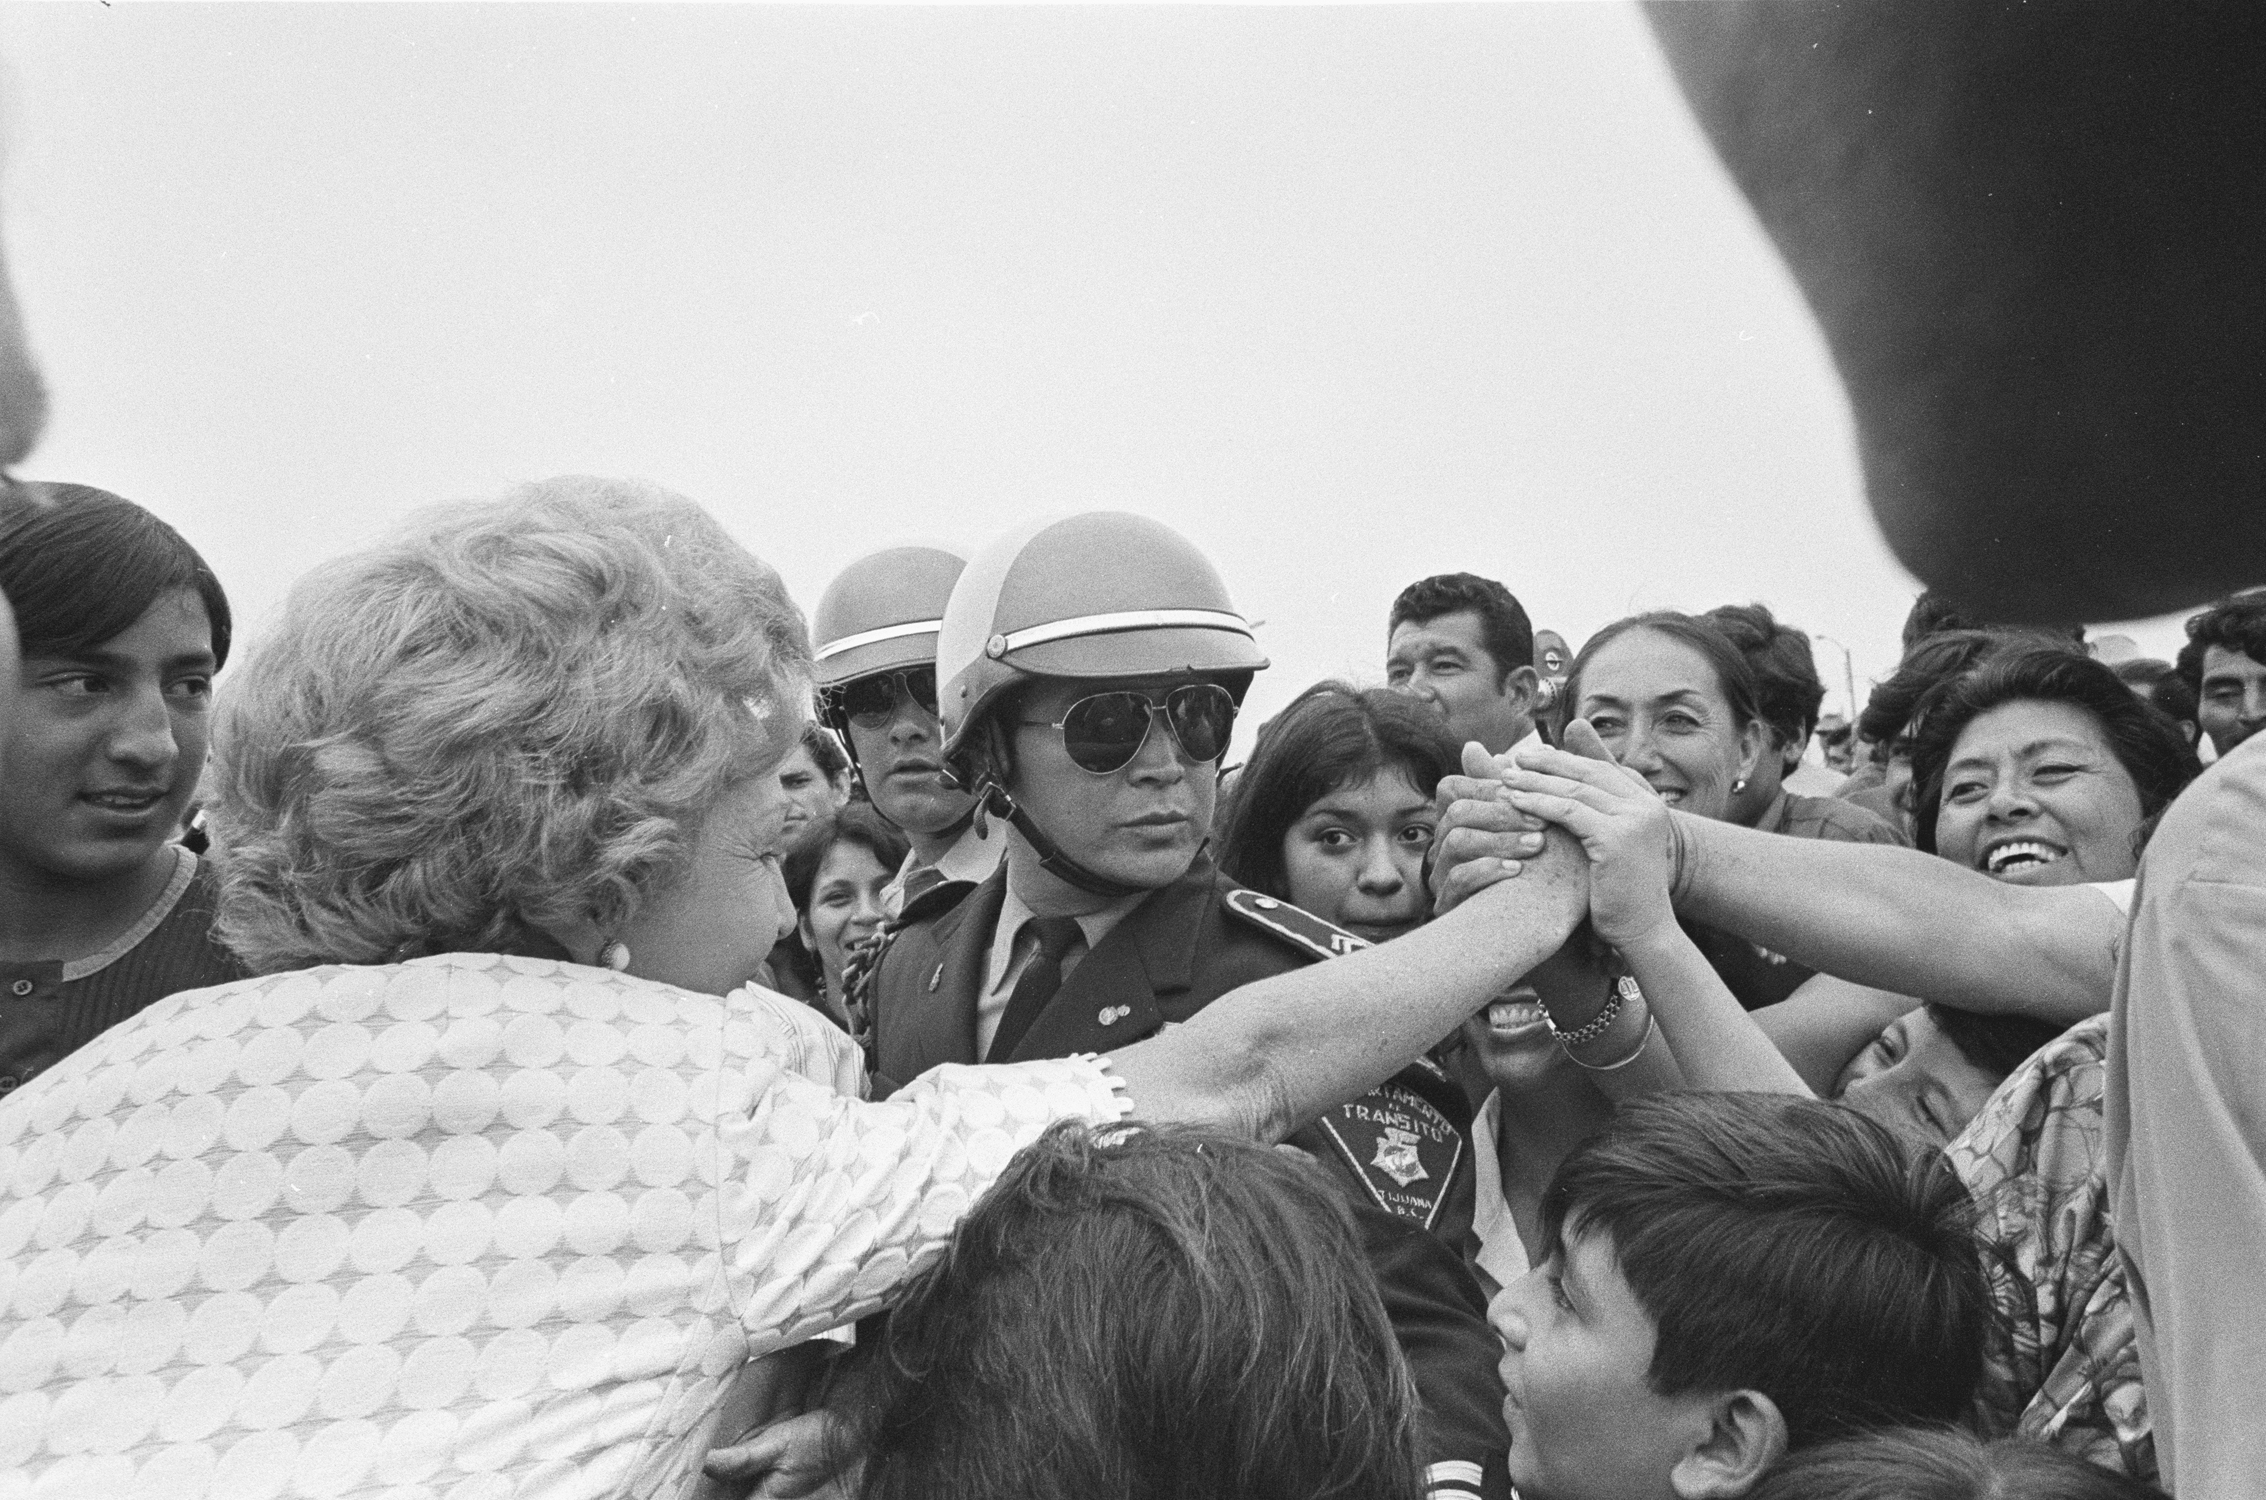 80. Pat Nixon shaking hands with Mexican citizens over the border fence.